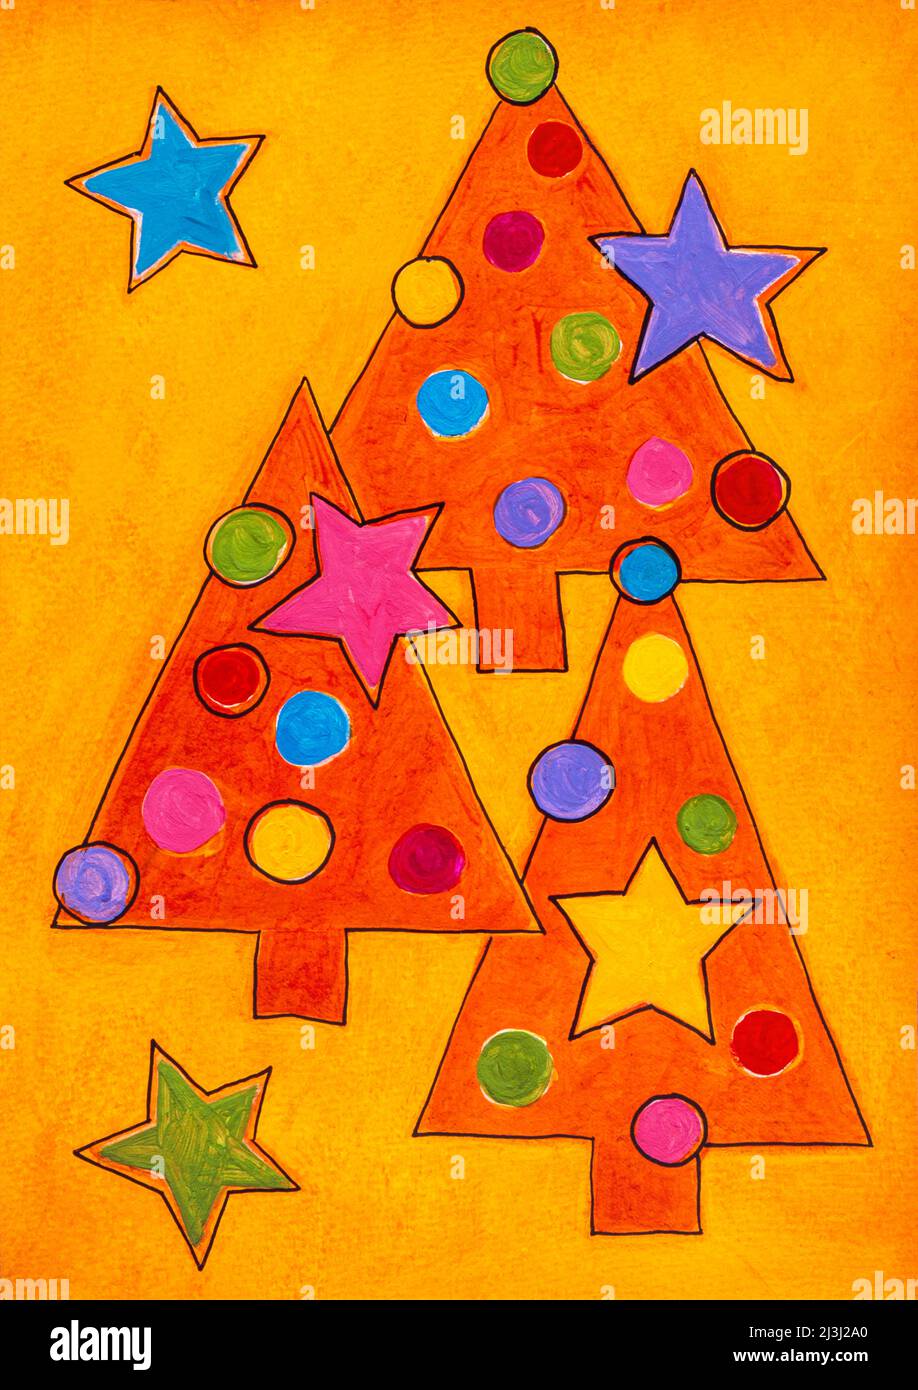 Graphic by Regine Martin Three trees, orange on red background, lines black, colored balls and stars Stock Photo